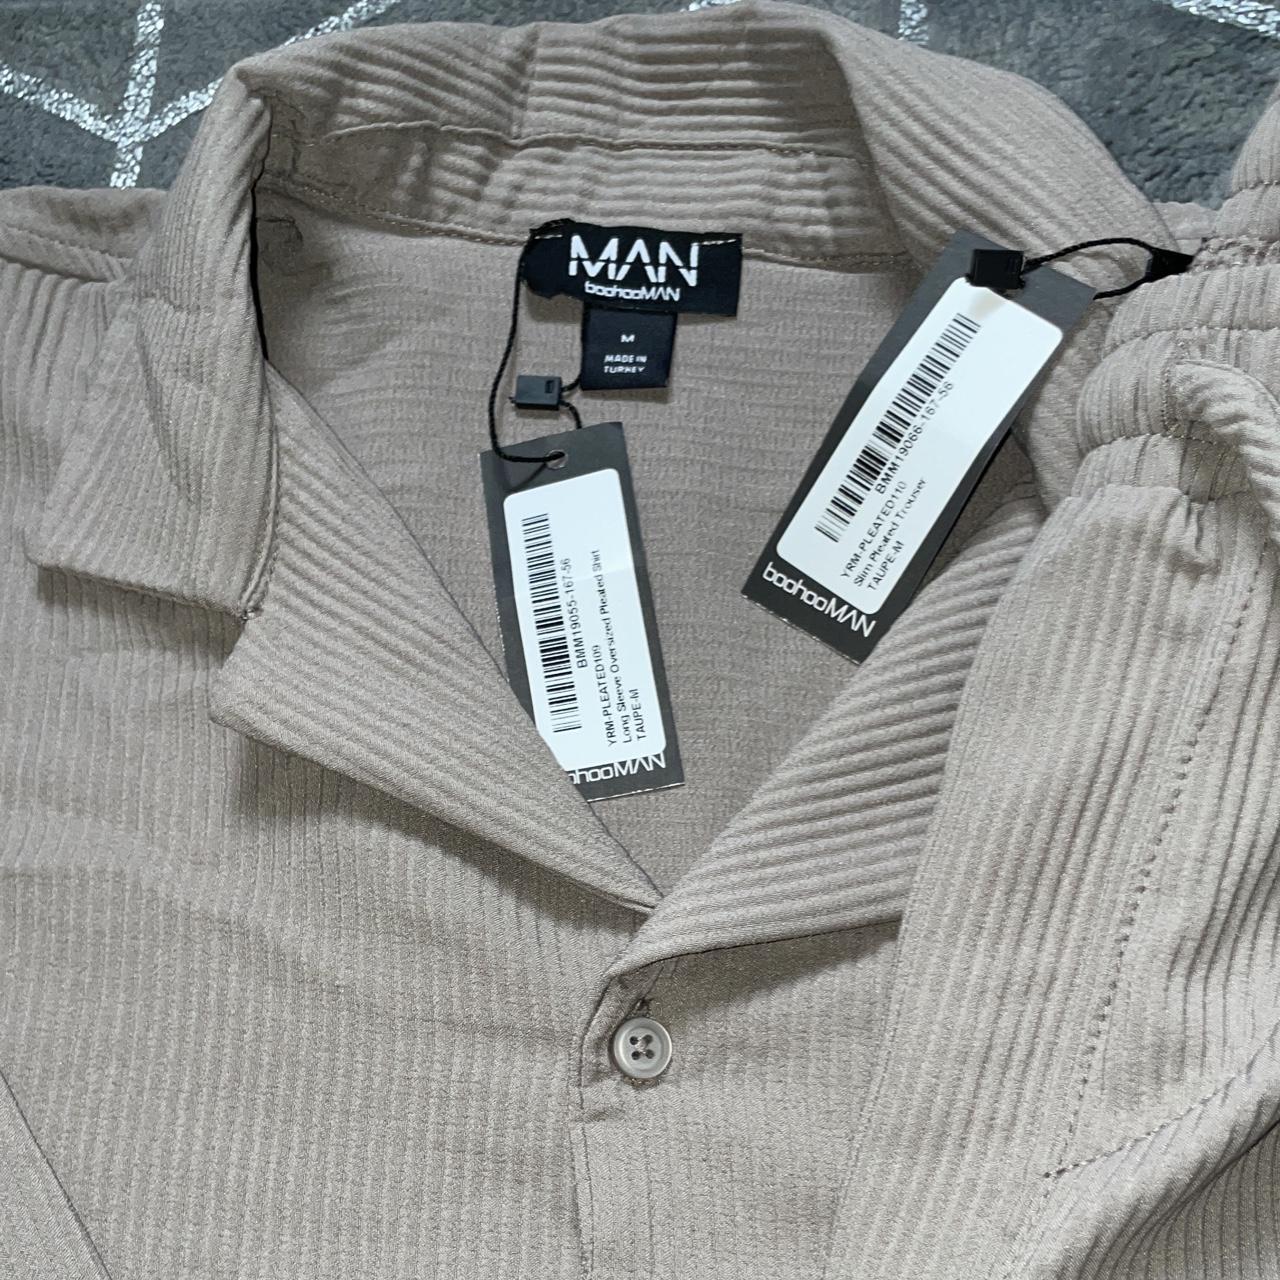 Boohoo Man Pleated Shirt and Trouser set Taupe... - Depop